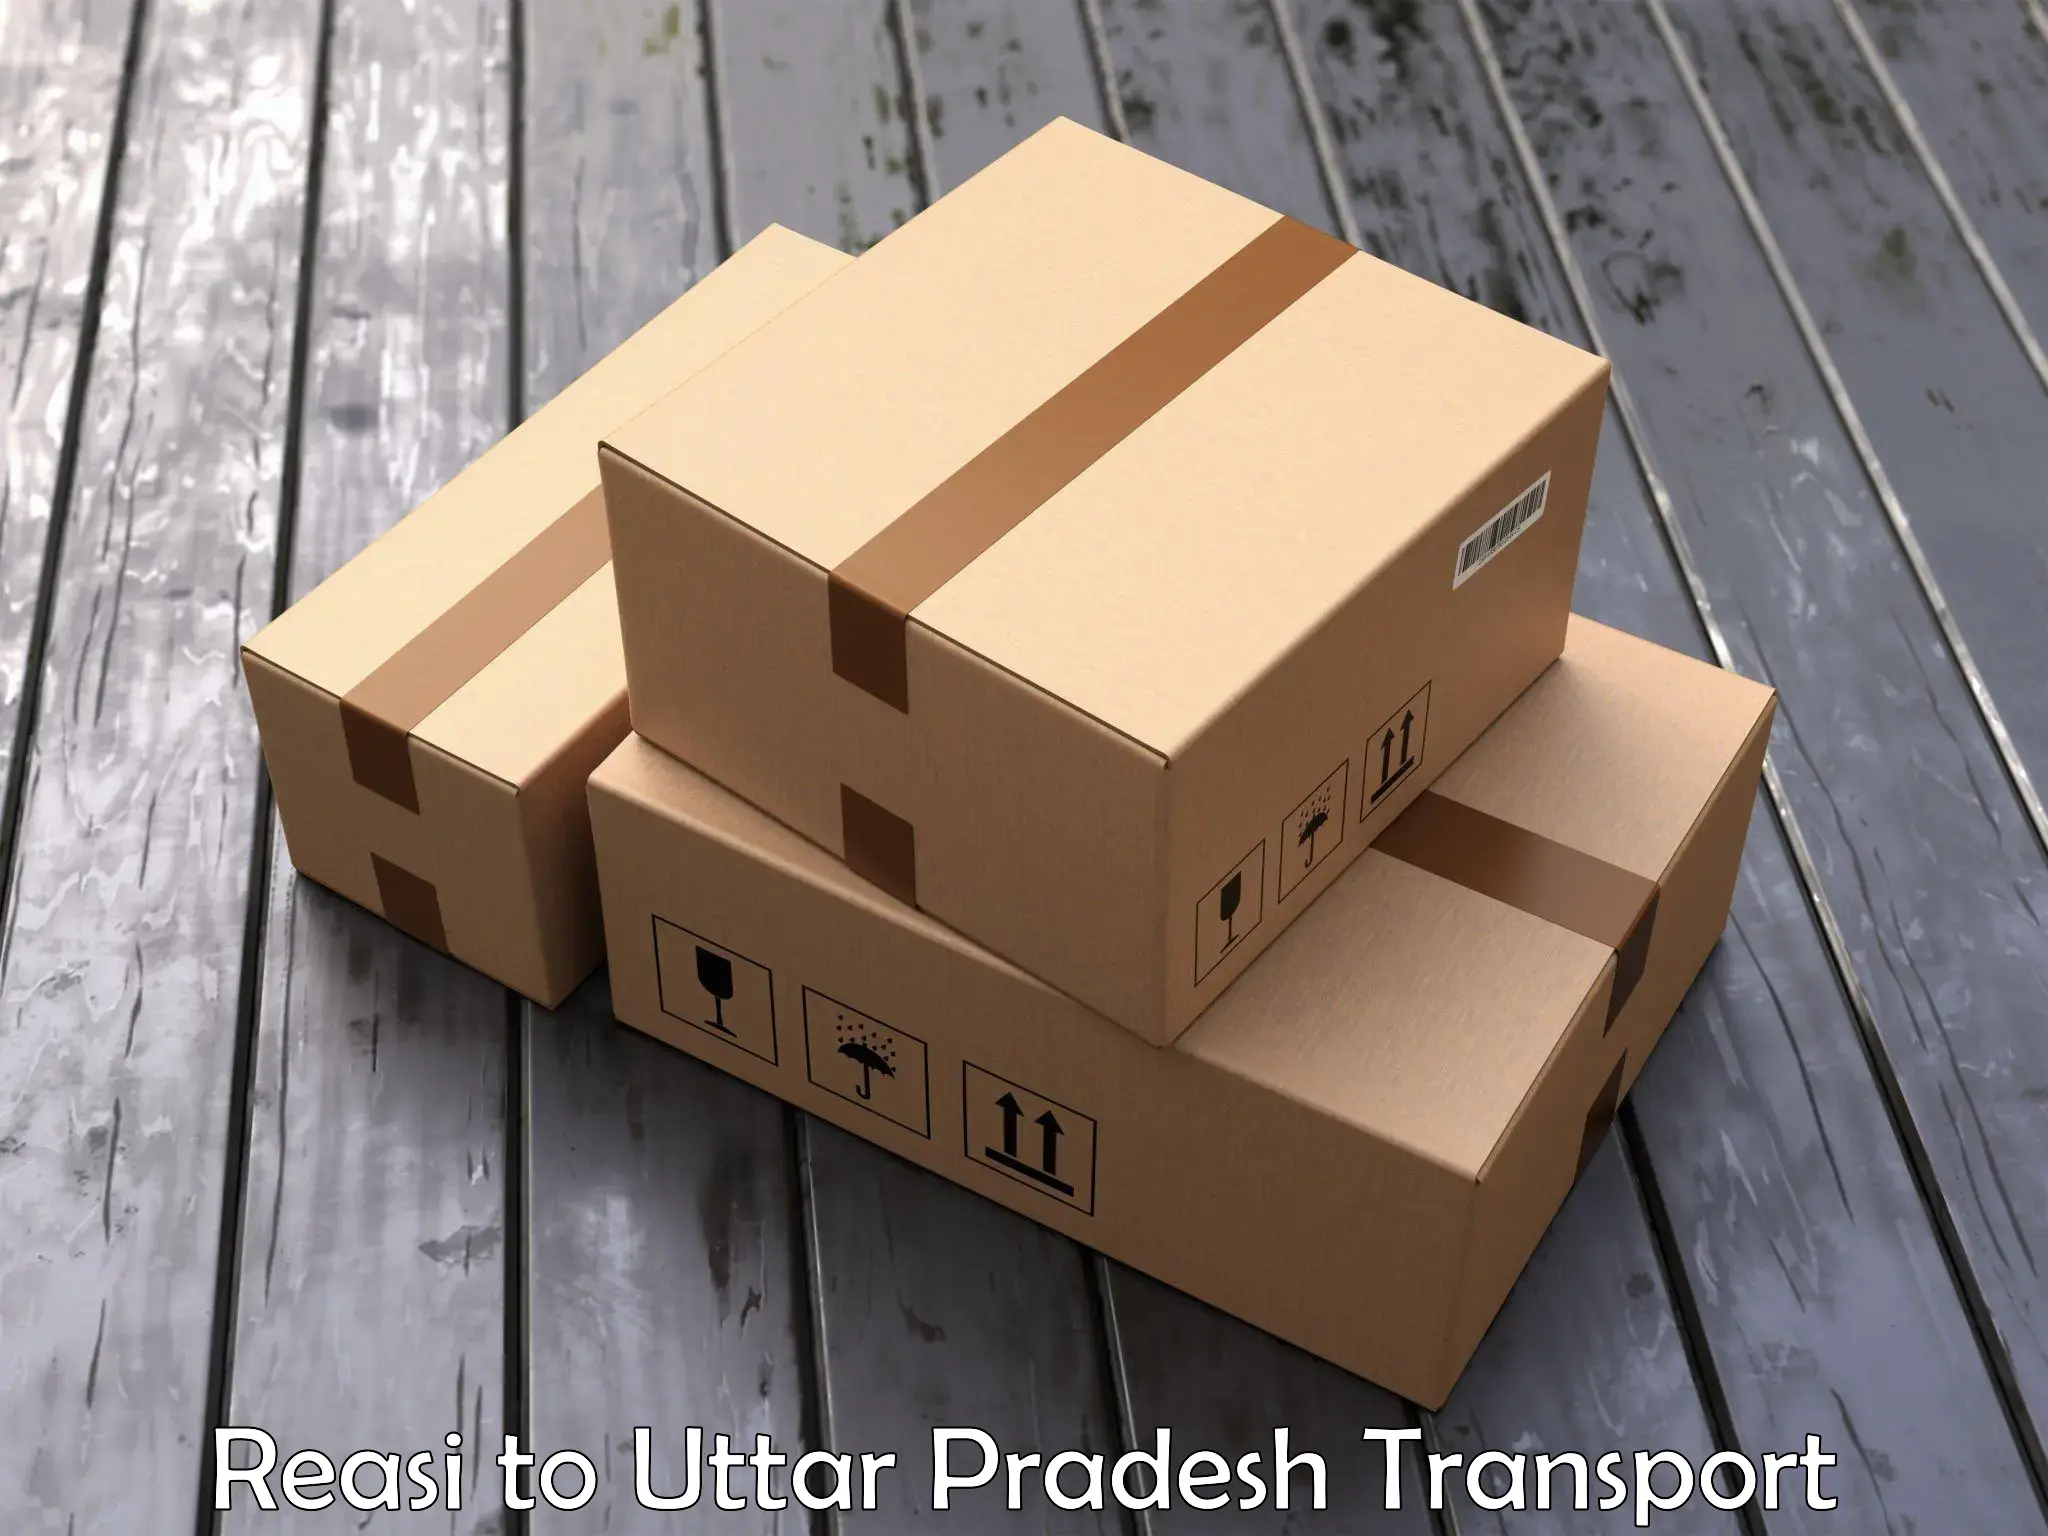 Transportation services Reasi to Lucknow